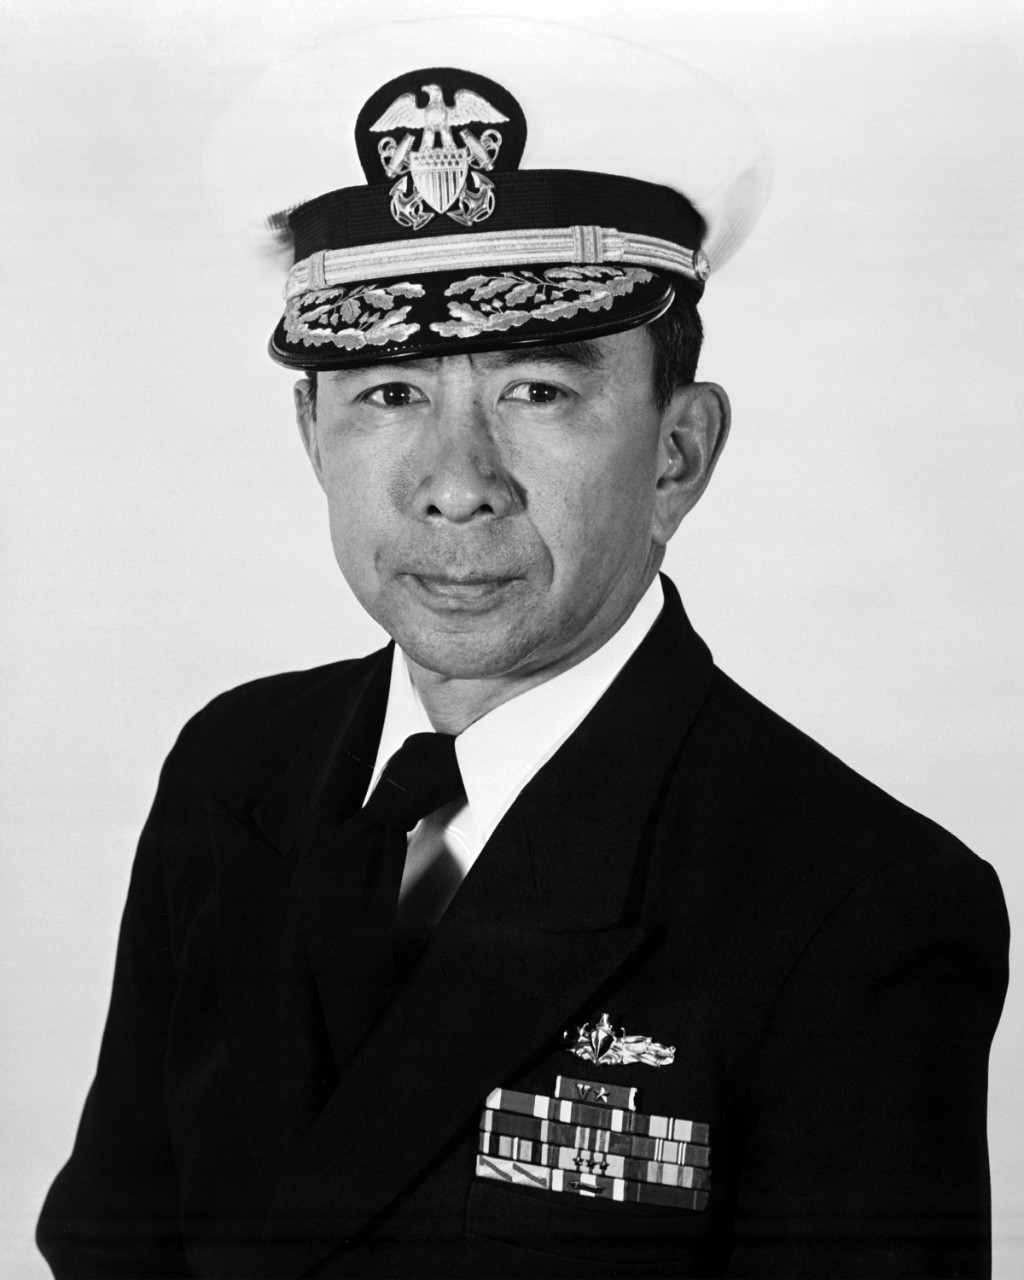 330-CFD-DN-SN-84-10138:   Commodore Robert K. U. Kihune, USN, 1984.   Covered photograph from August 1, 1984.   Official U.S. Navy photograph, now in the collections of the National Archives. 